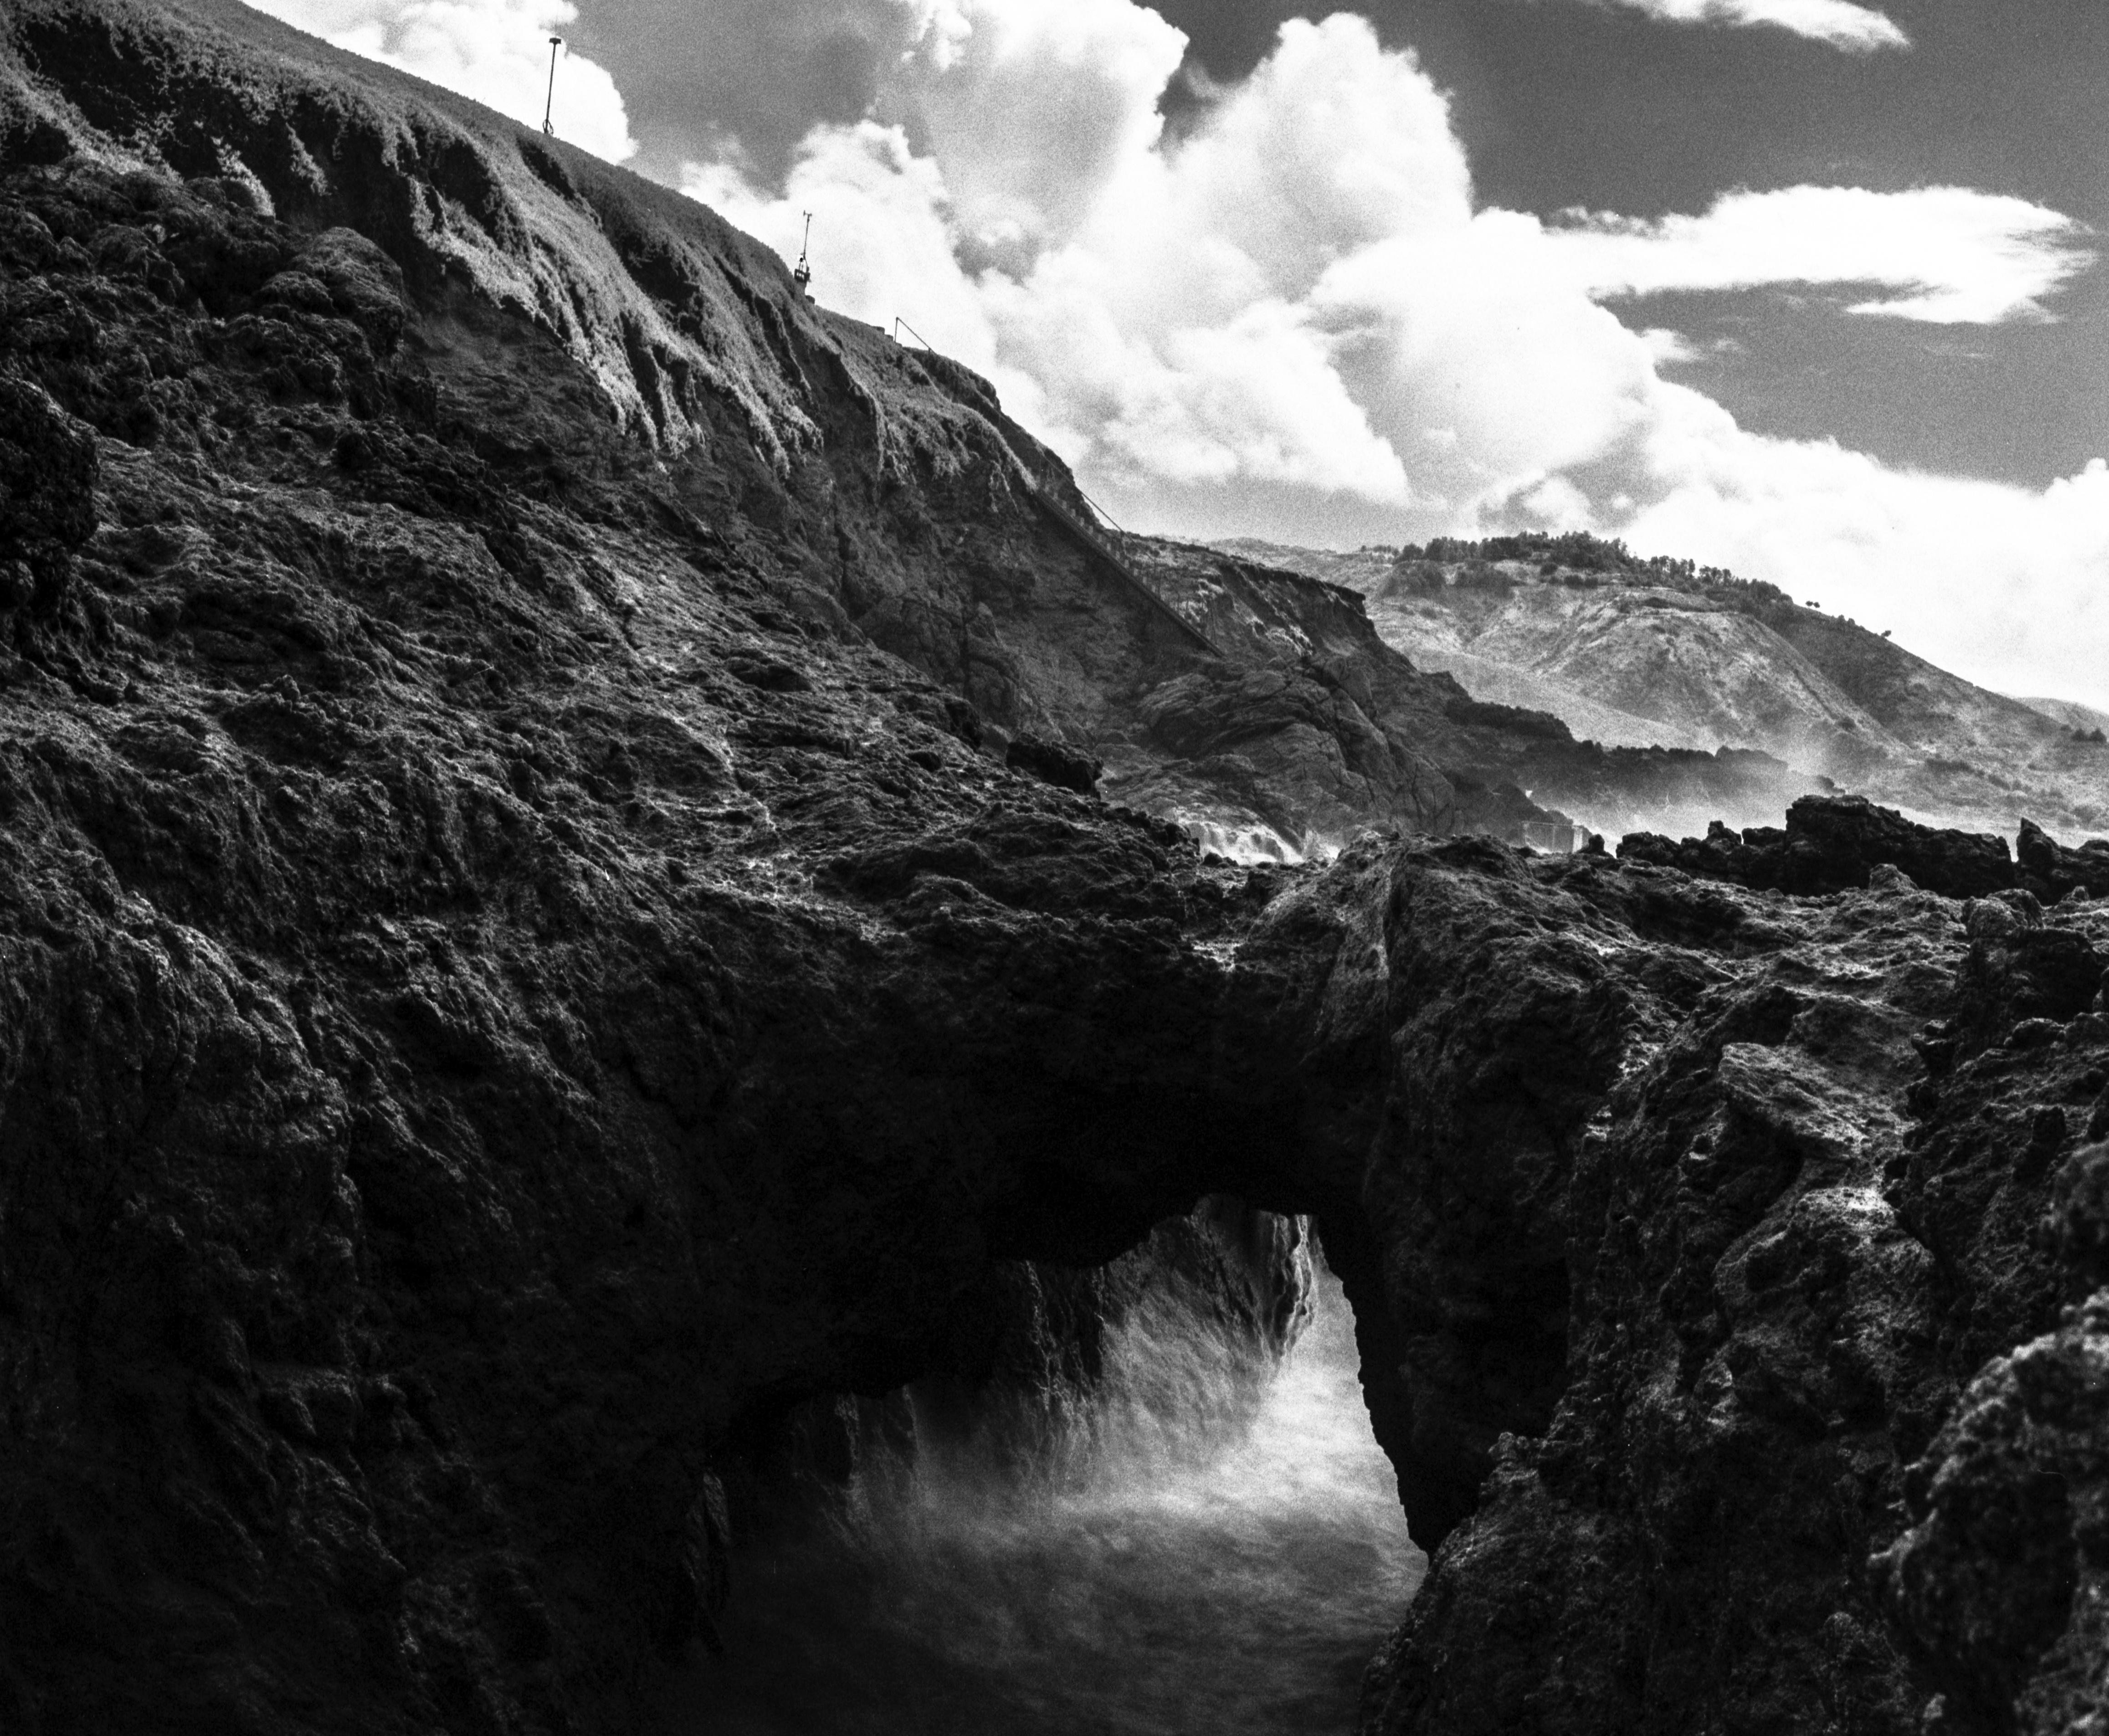 Rachell Hester Black and White Photograph - "Below the Surface" A Haunting Infrared Silver Gelatin Photograph of Big Sur